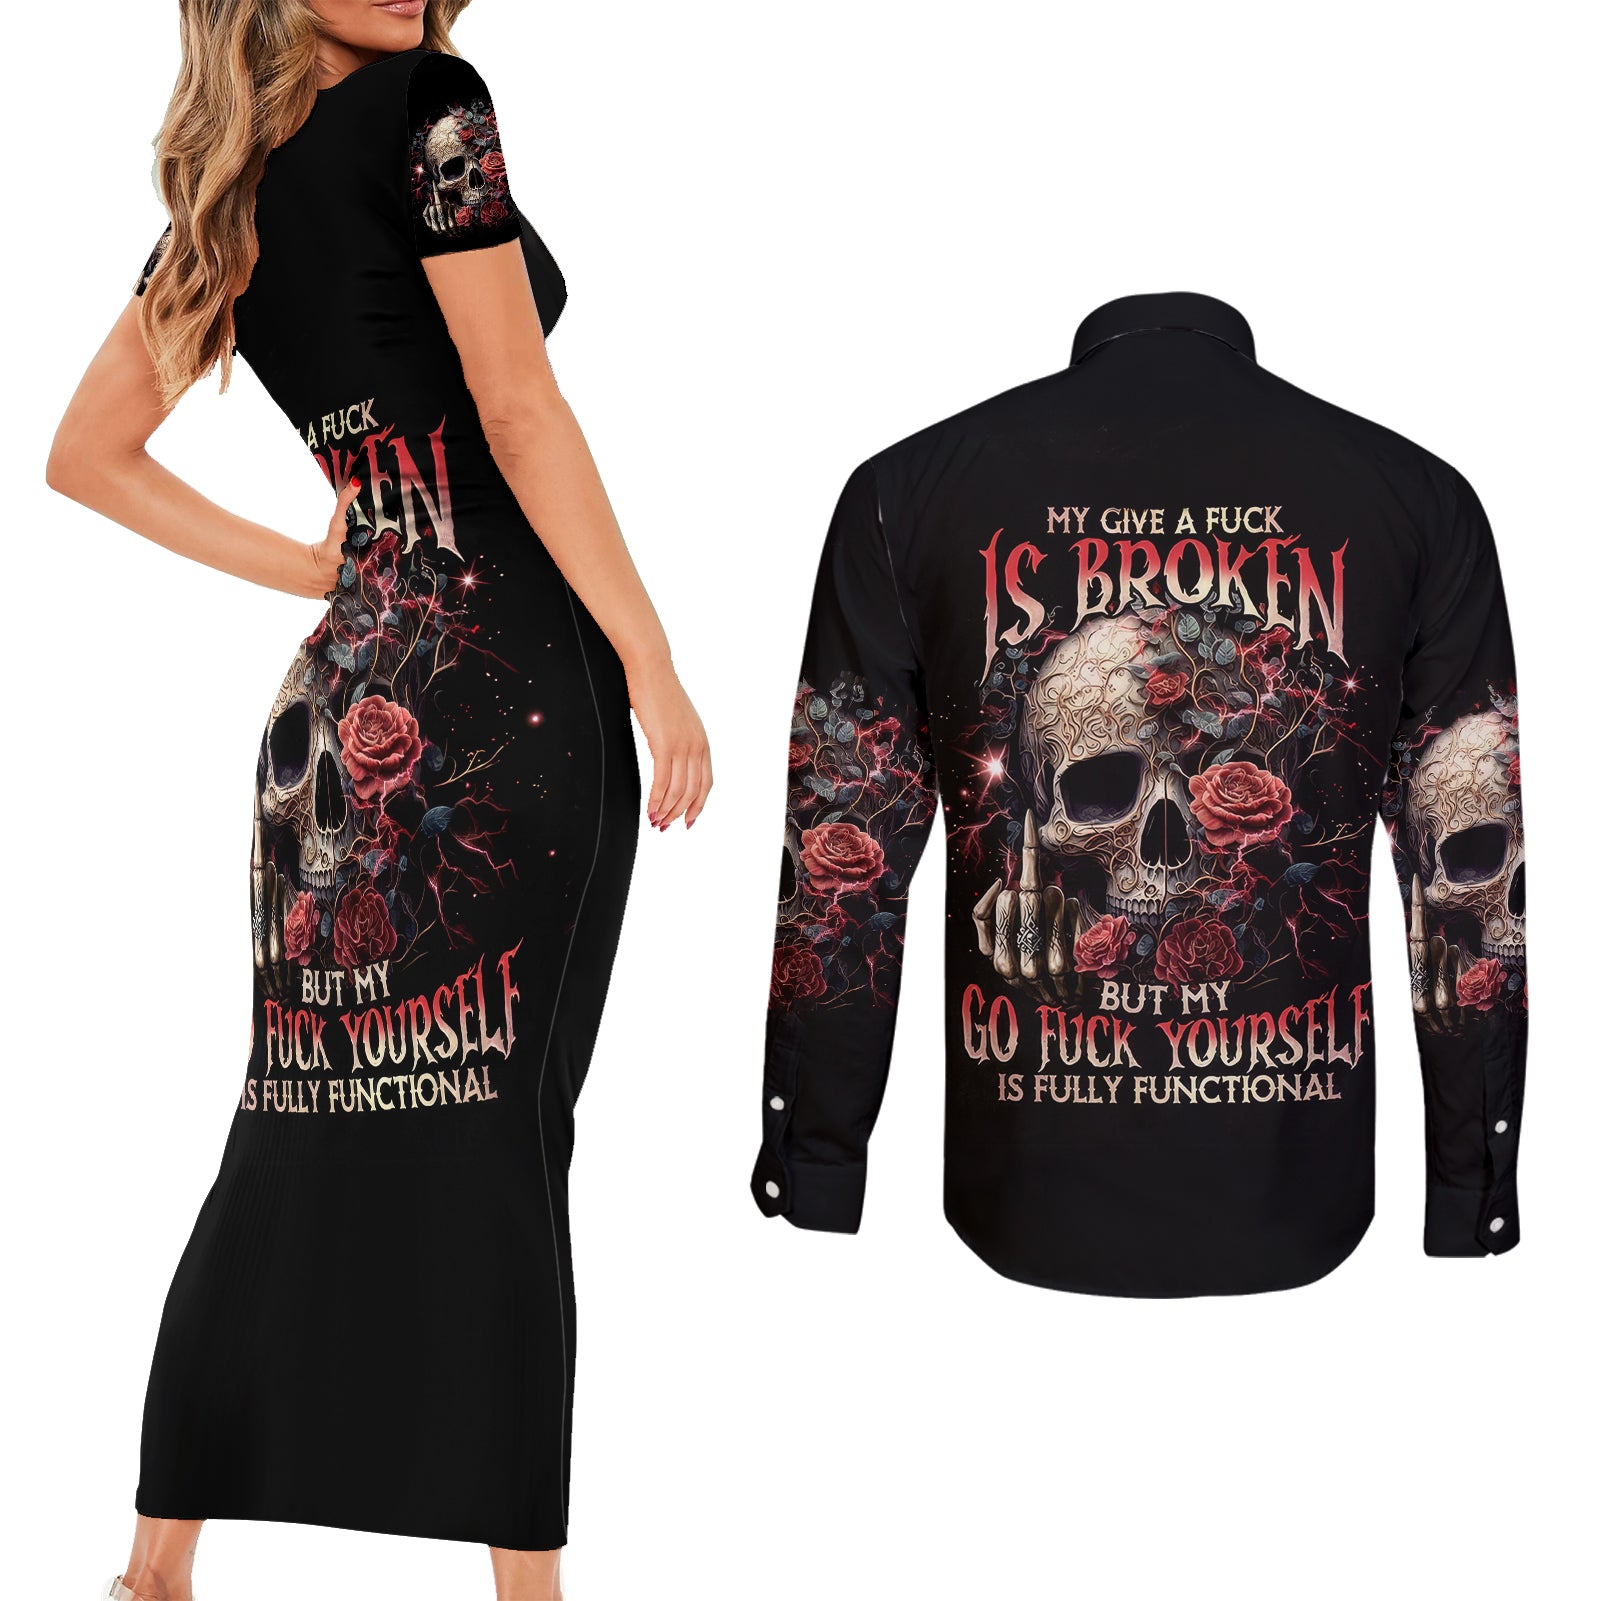 rose-skull-couples-matching-short-sleeve-bodycon-dress-and-long-sleeve-button-shirts-my-give-a-fuck-is-broken-but-my-go-fuck-yourself-is-functional